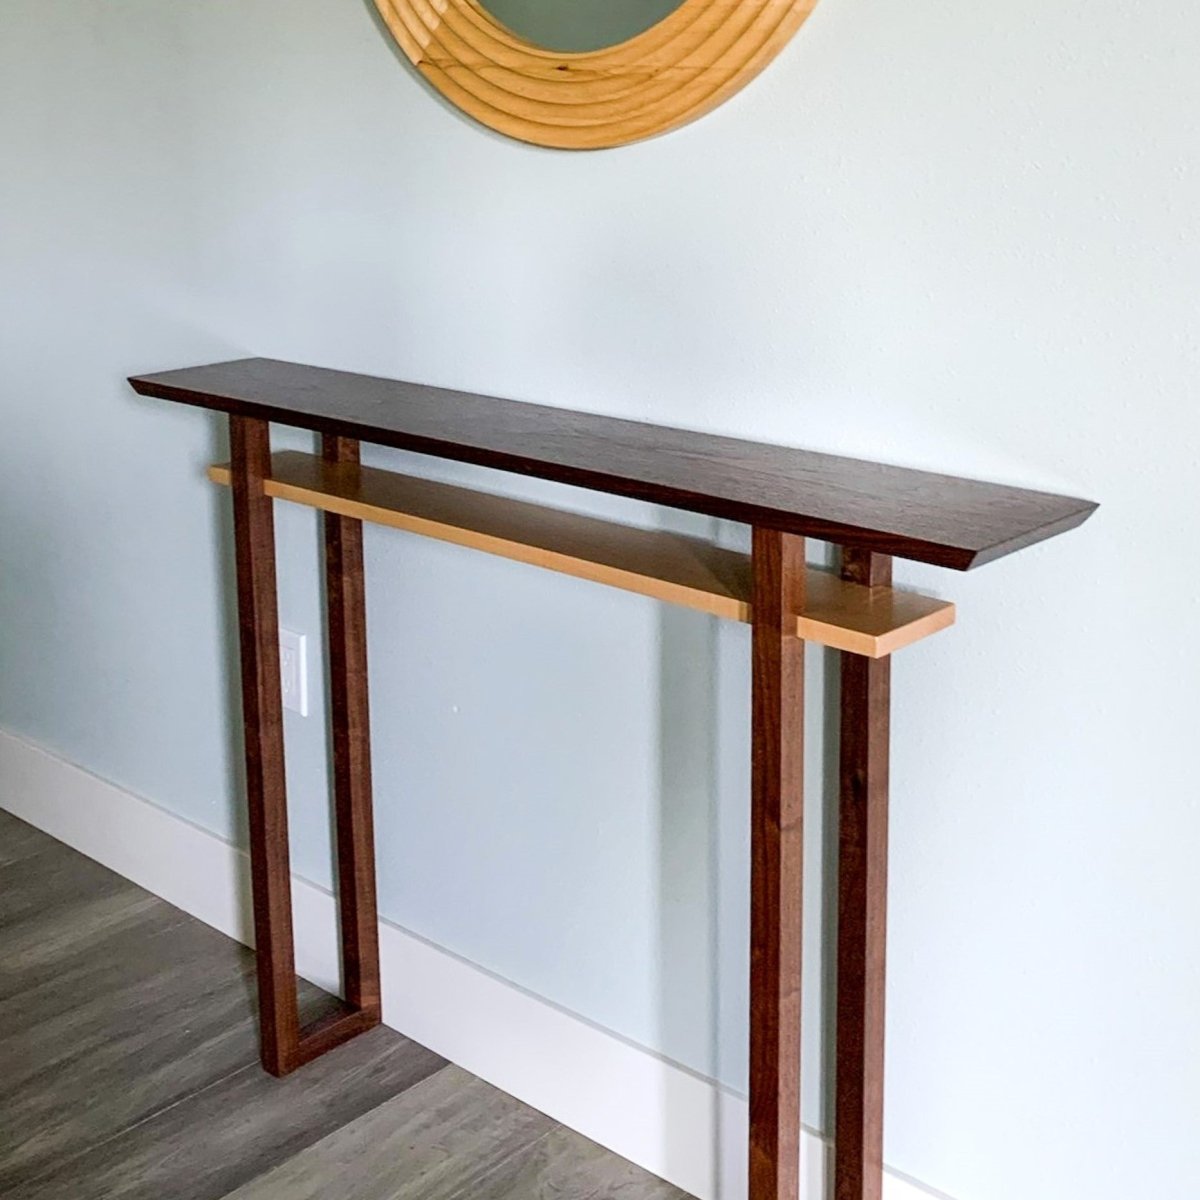 A narrow walnut console table for a modern entryway by Mokuzai Furniture